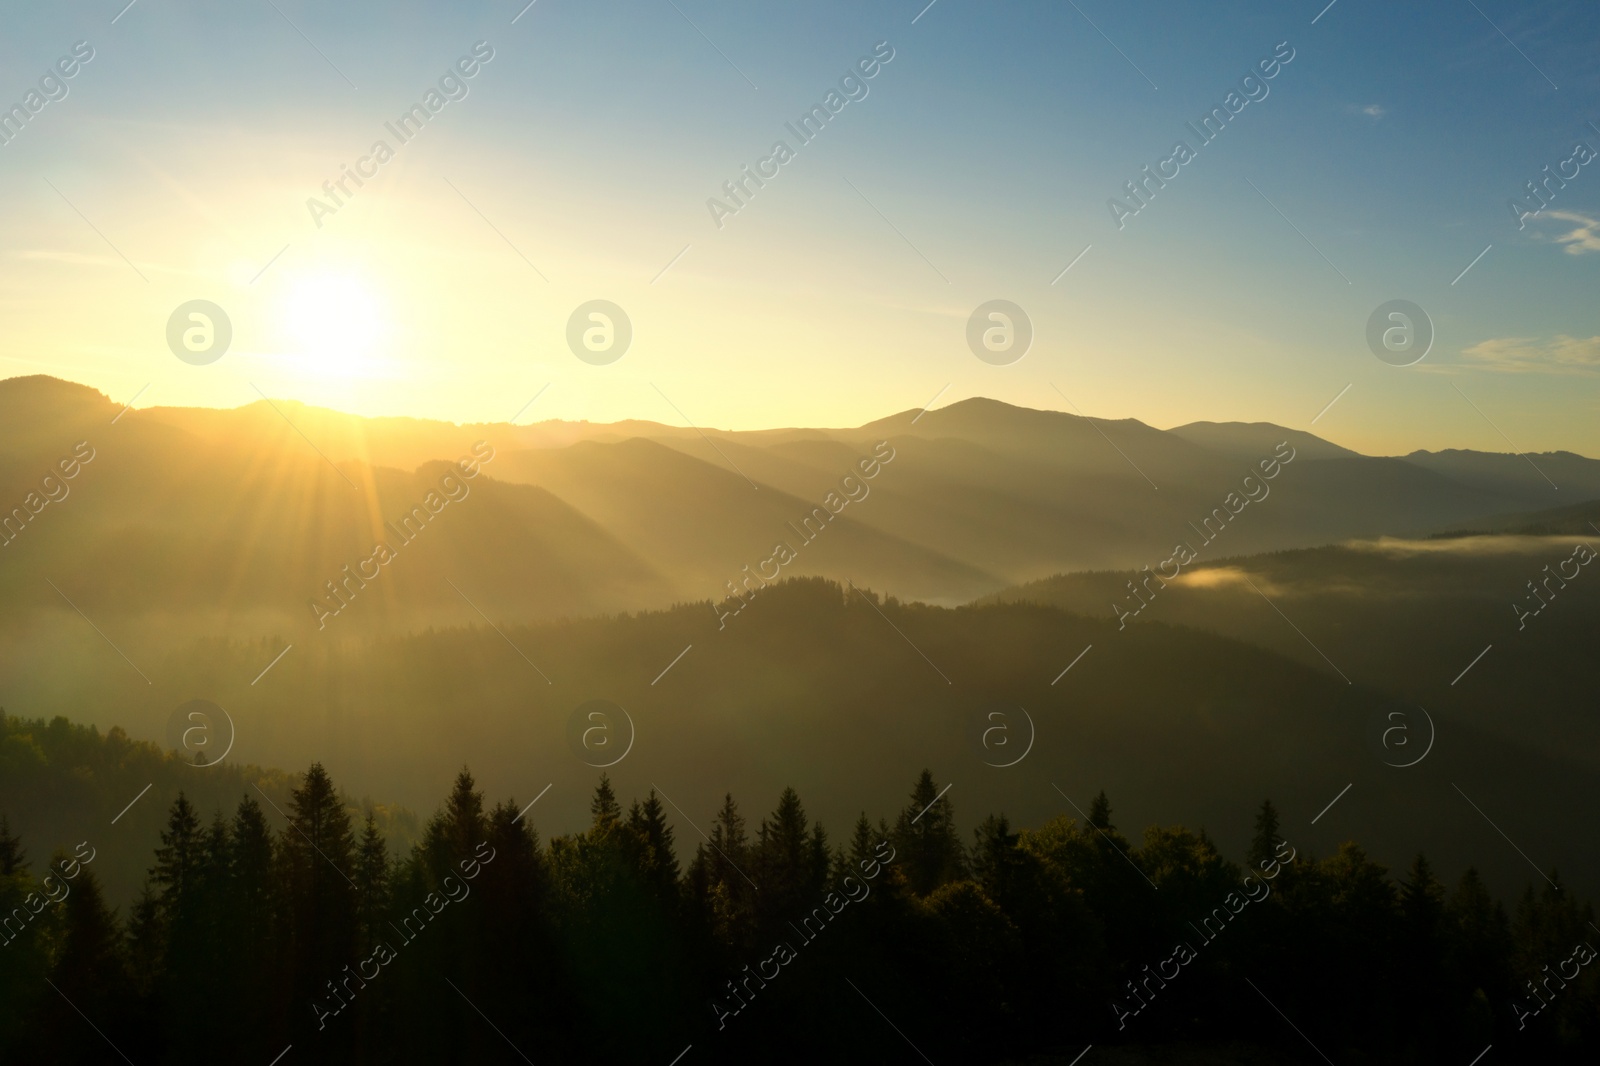 Image of Sun shining over forest in misty mountains. Drone photography